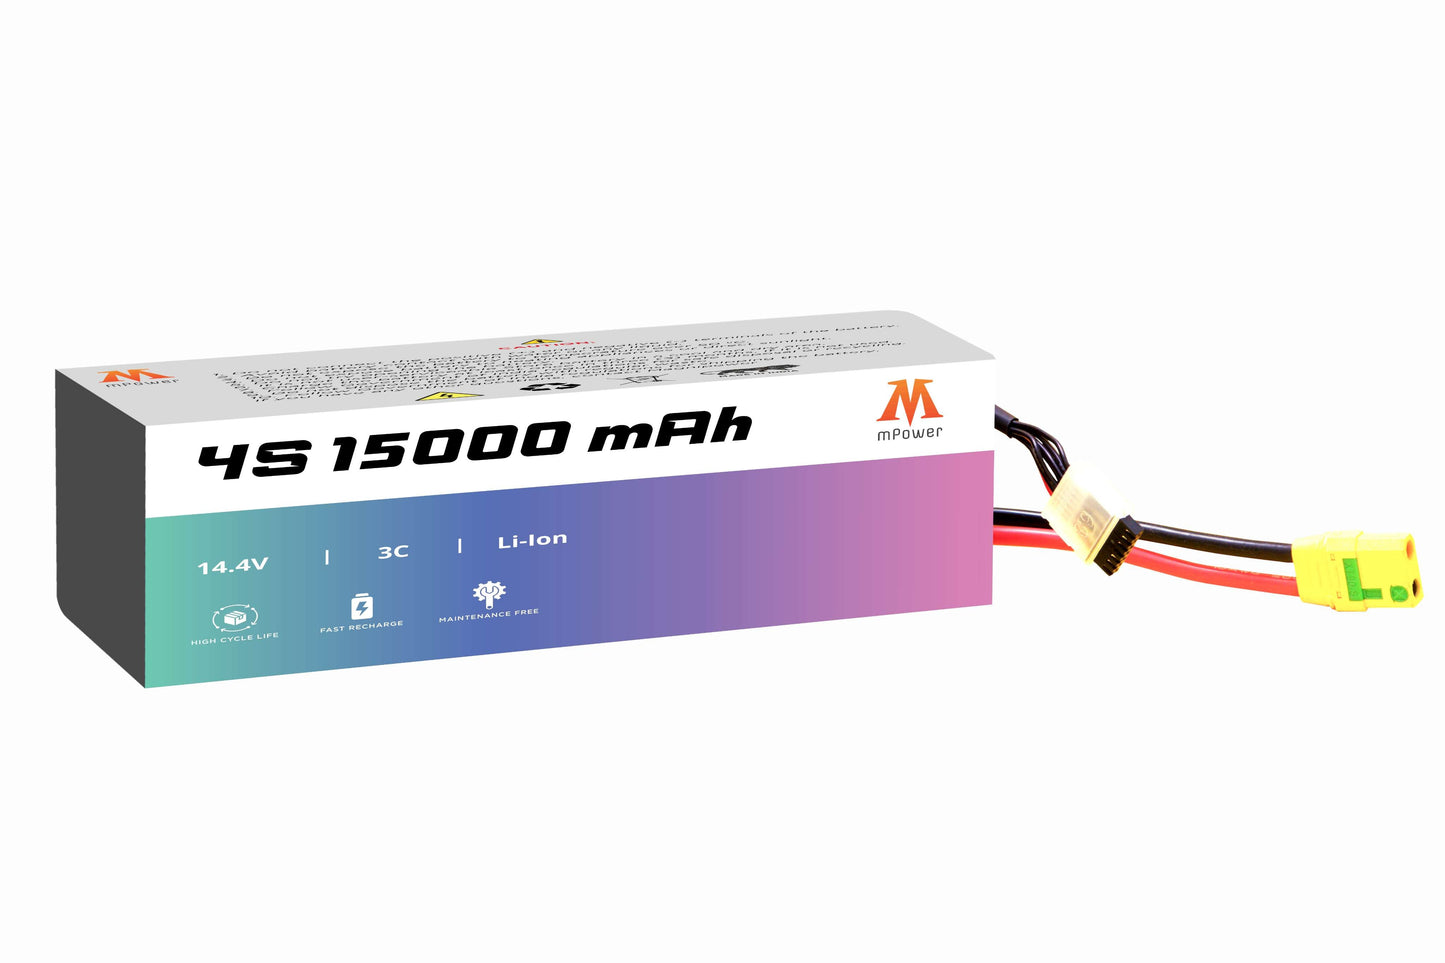 mPower 4S 15000mah 3C Lithium-Ion Battery for Surveillance Drones